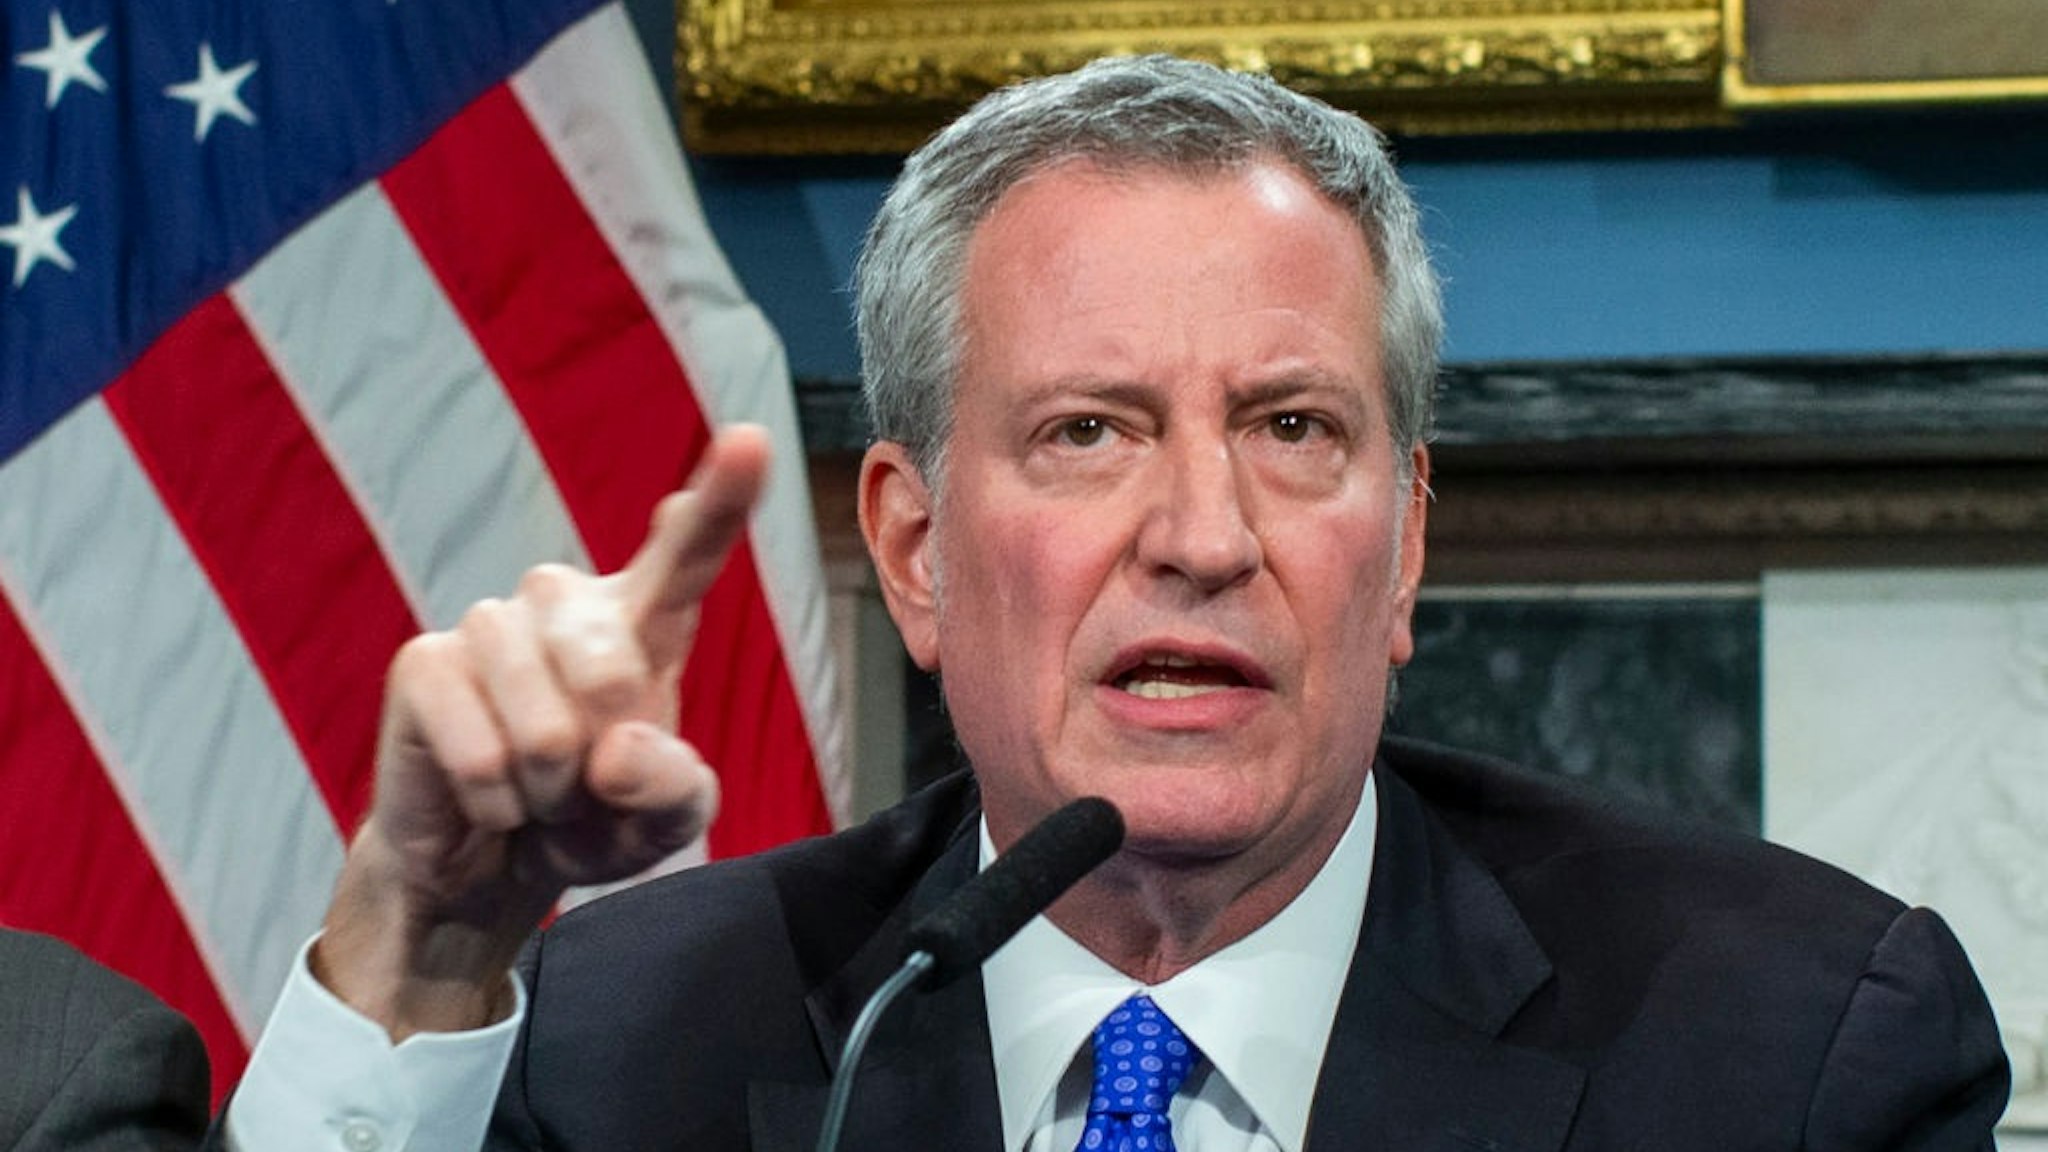 NEW YORK, NY - JANUARY 03: New York Mayor Bill de Blasio speaks to the media during a press conference at City Hall on January 3, 2020 in New York City.